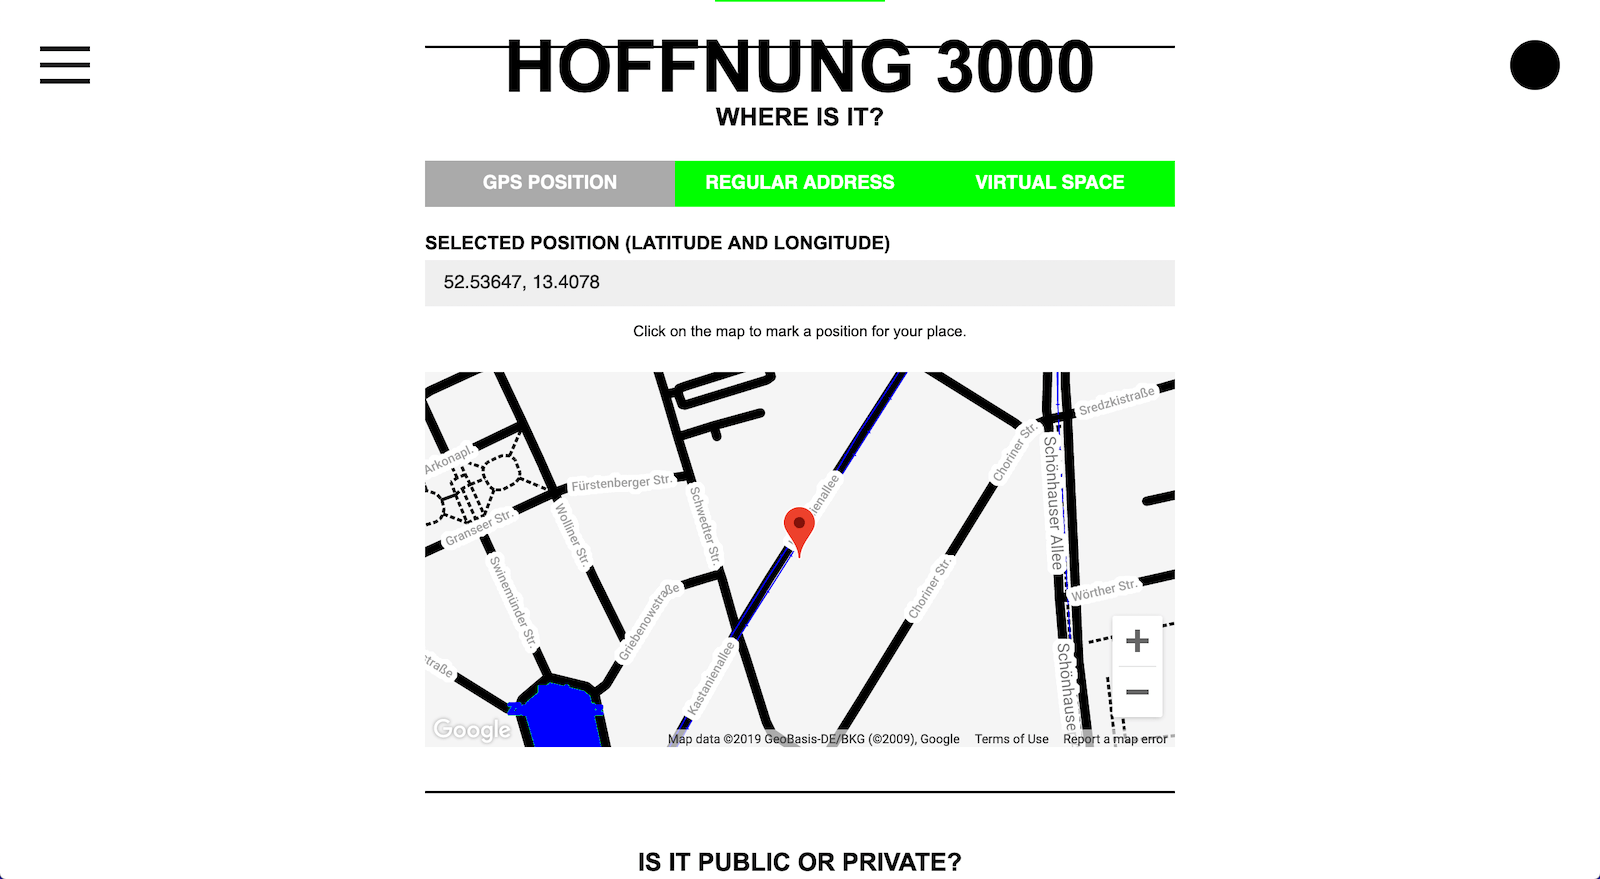 HOFFNUNG 3000 Create new place